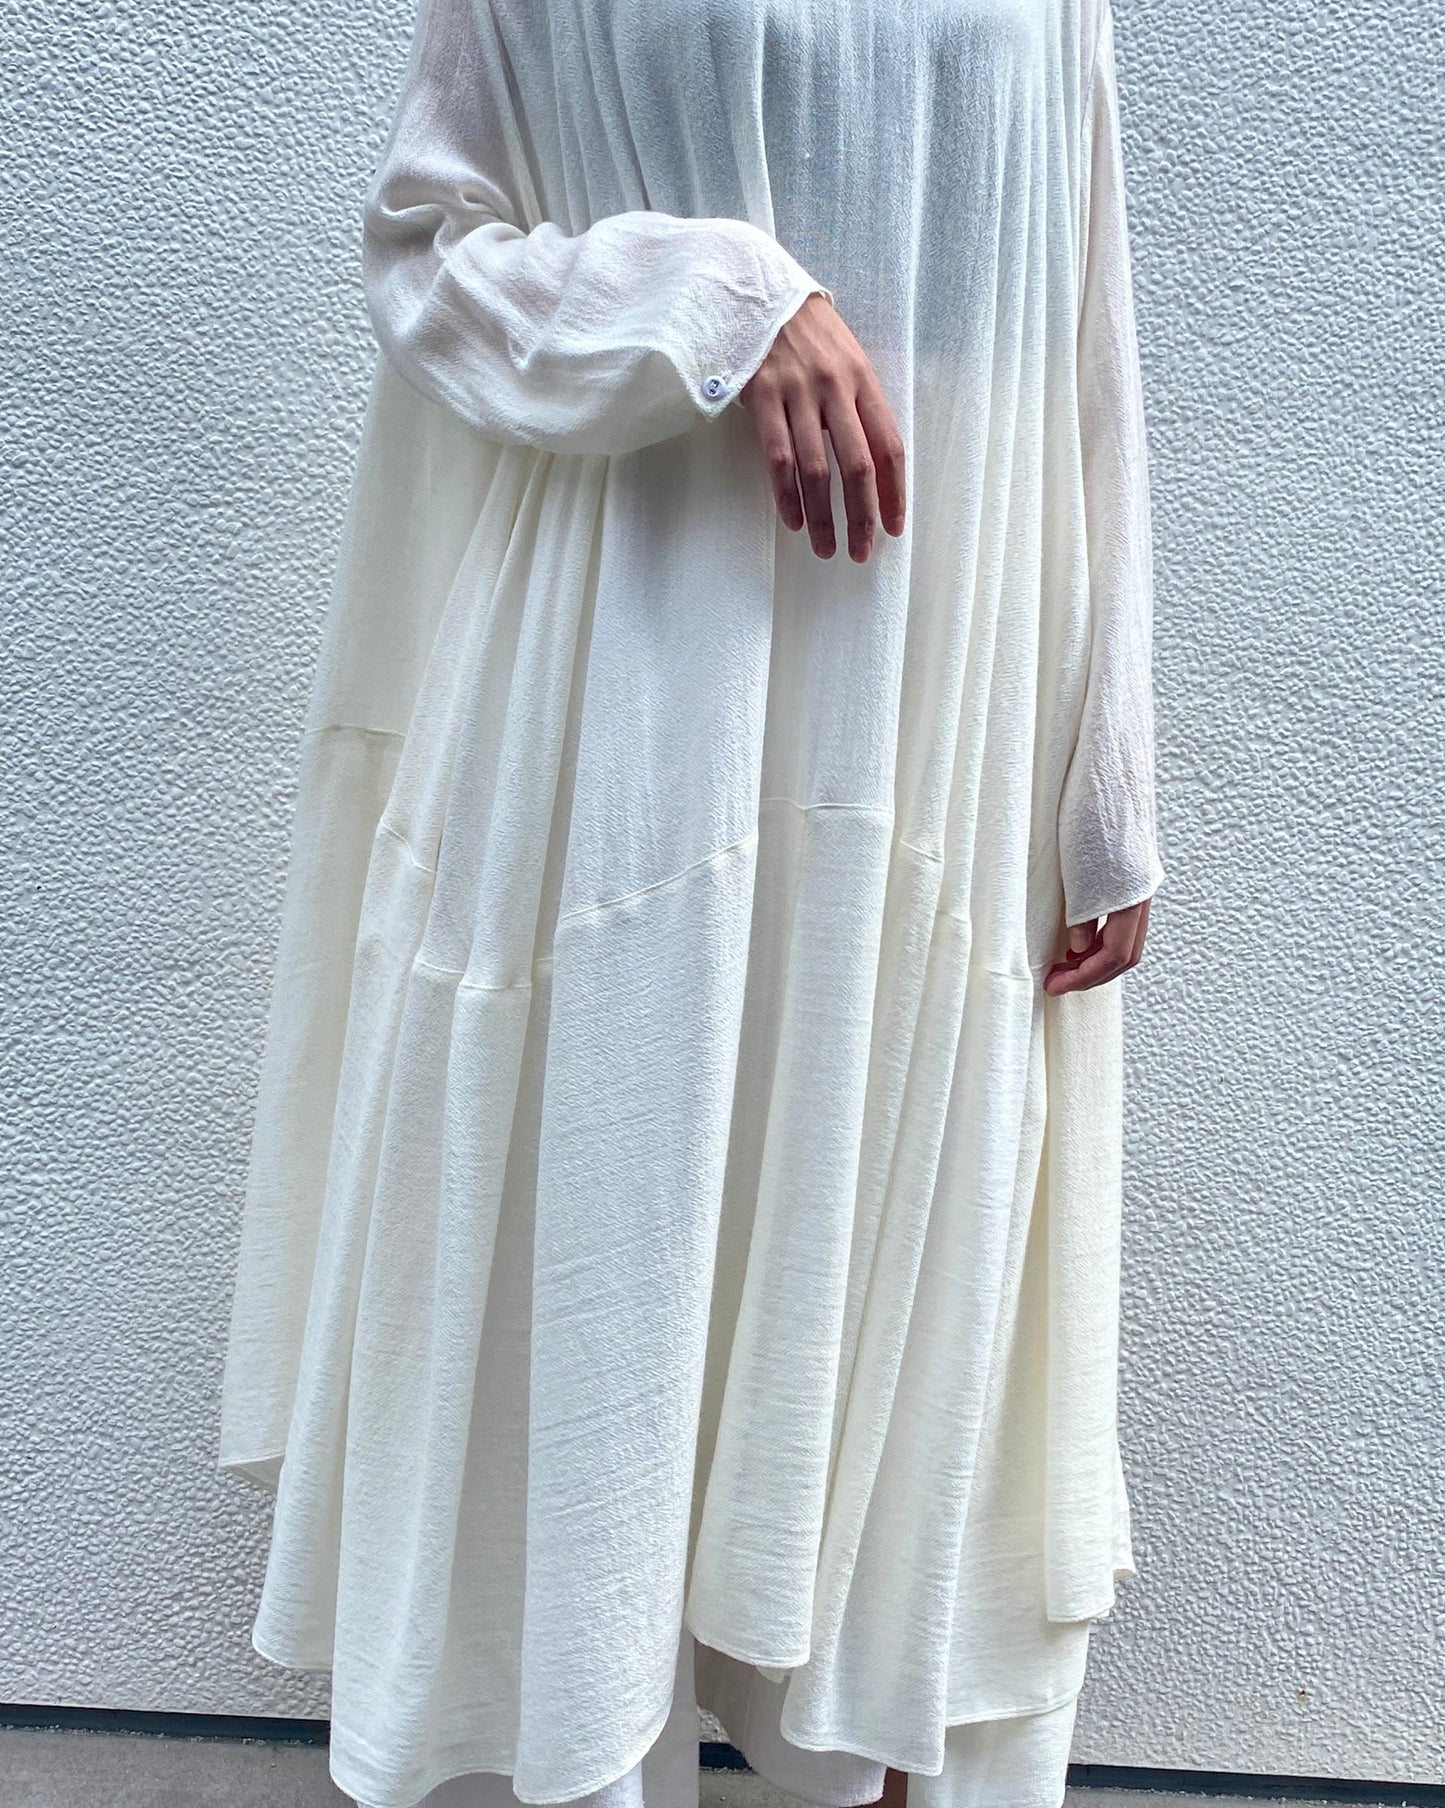 [Whiteread] Eclipse Dress with Sleeves - Salt